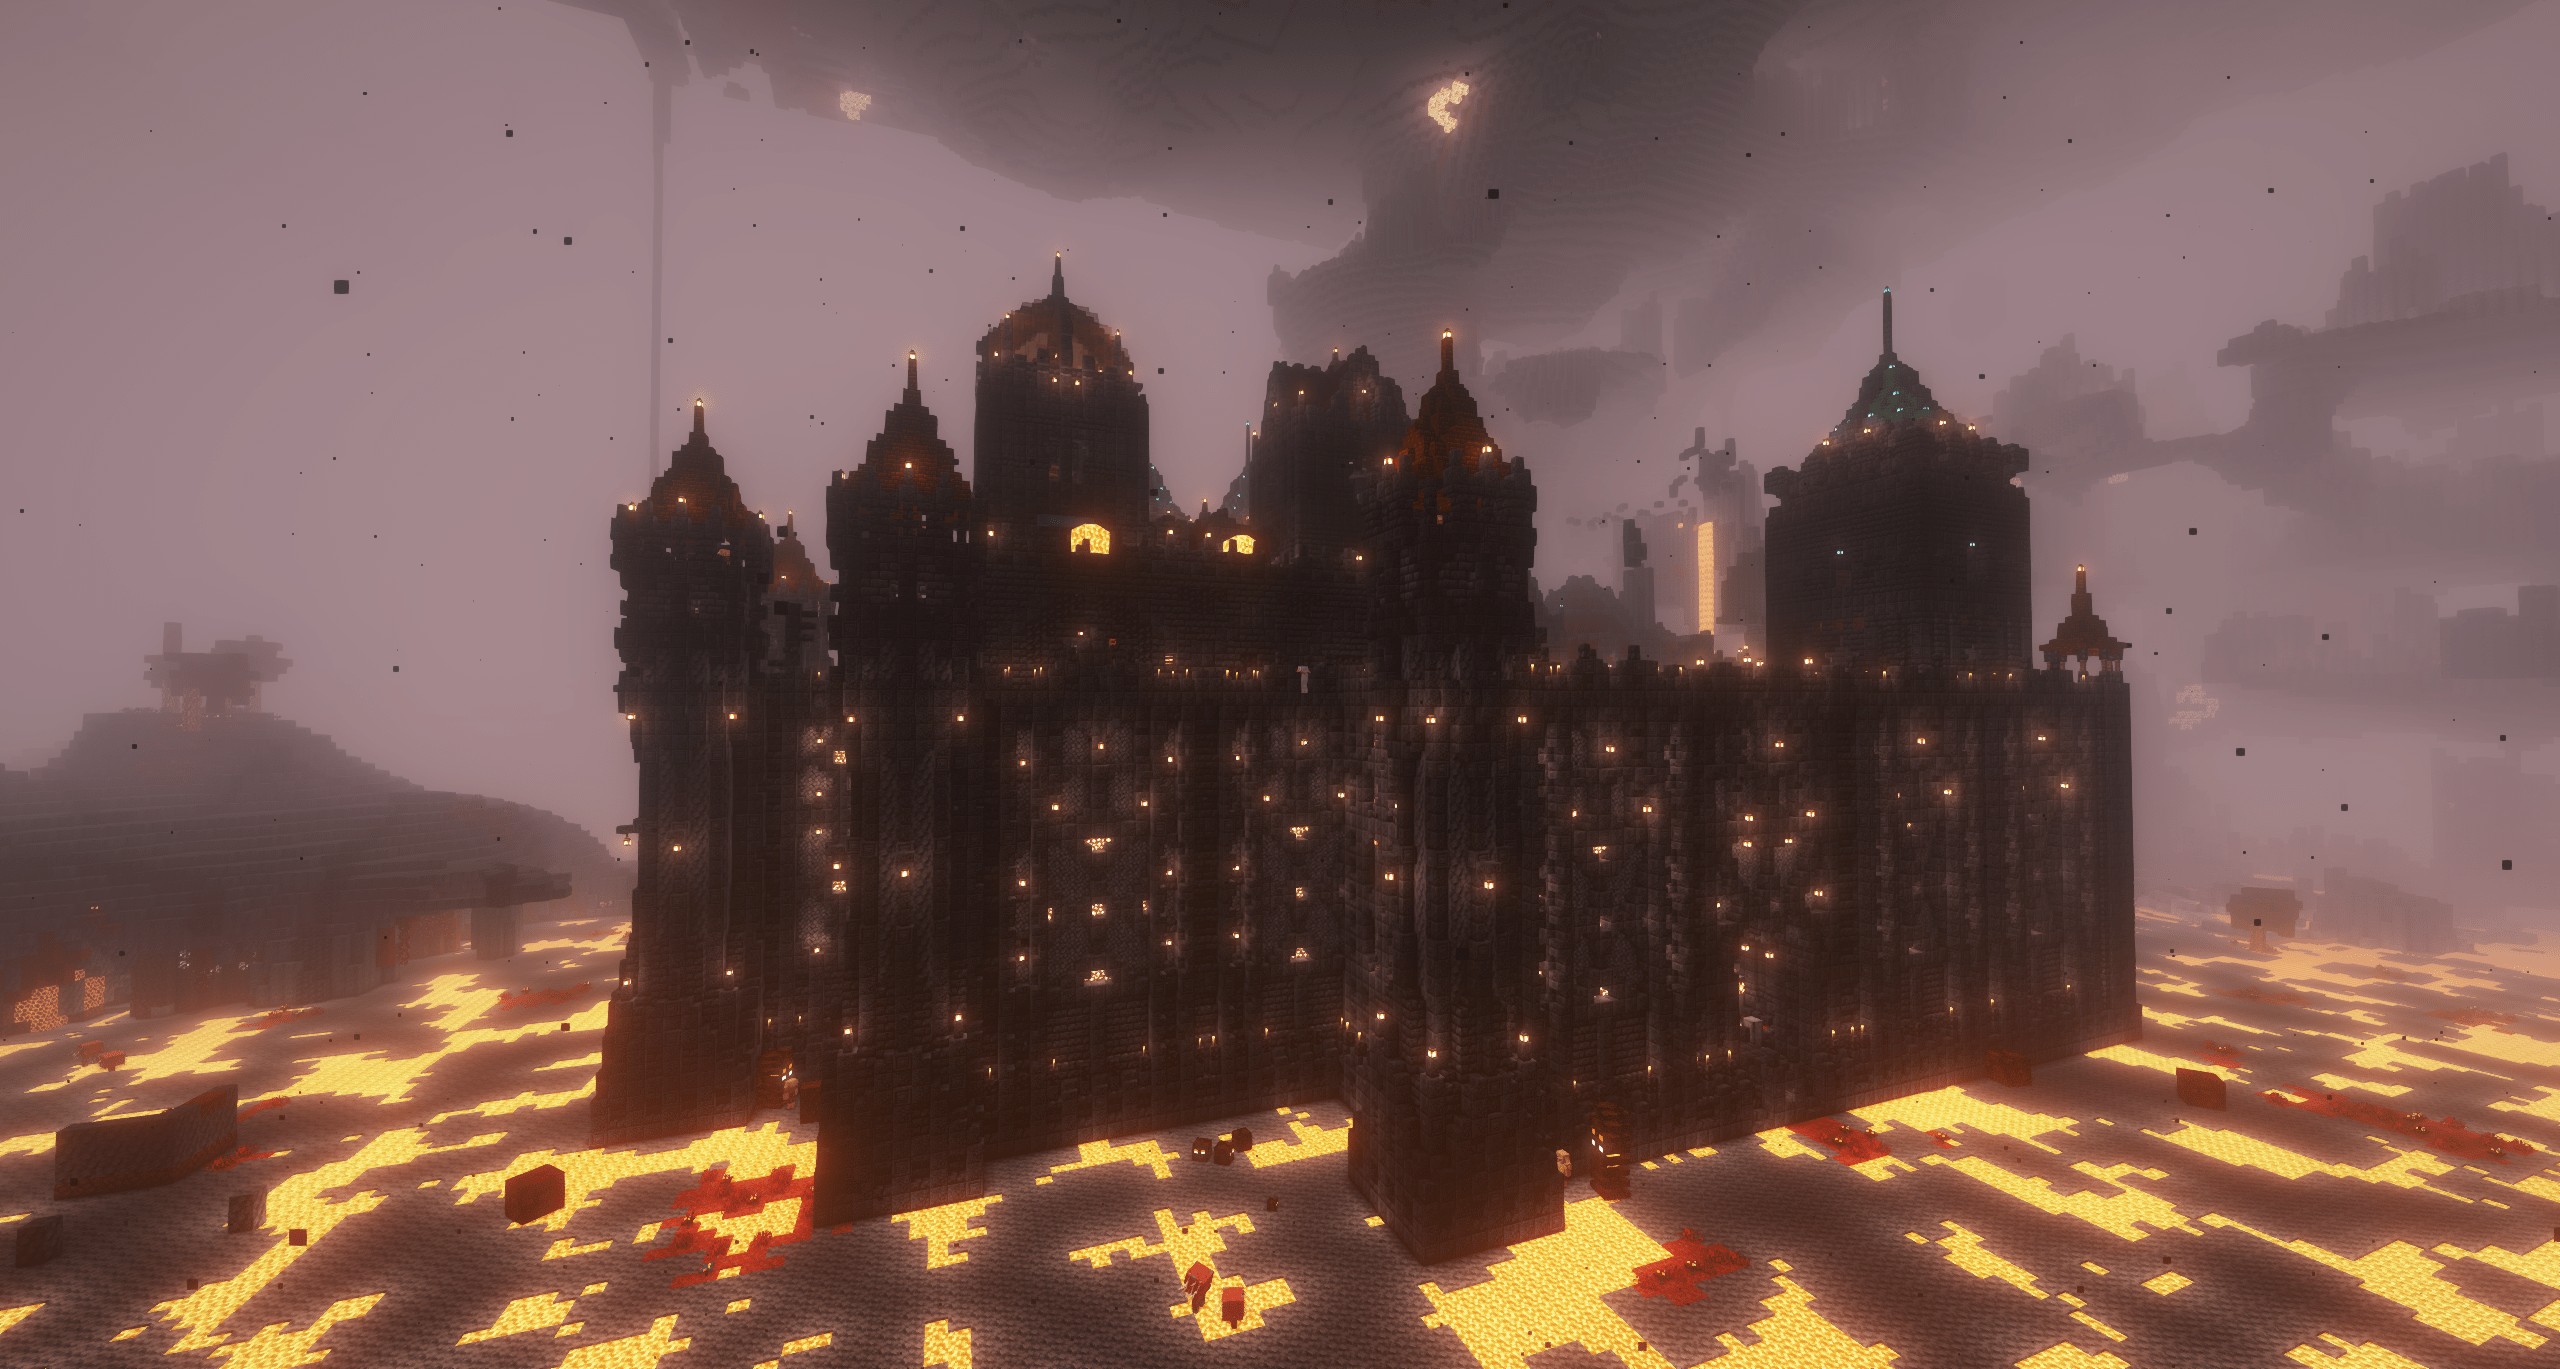 The Nether Castle